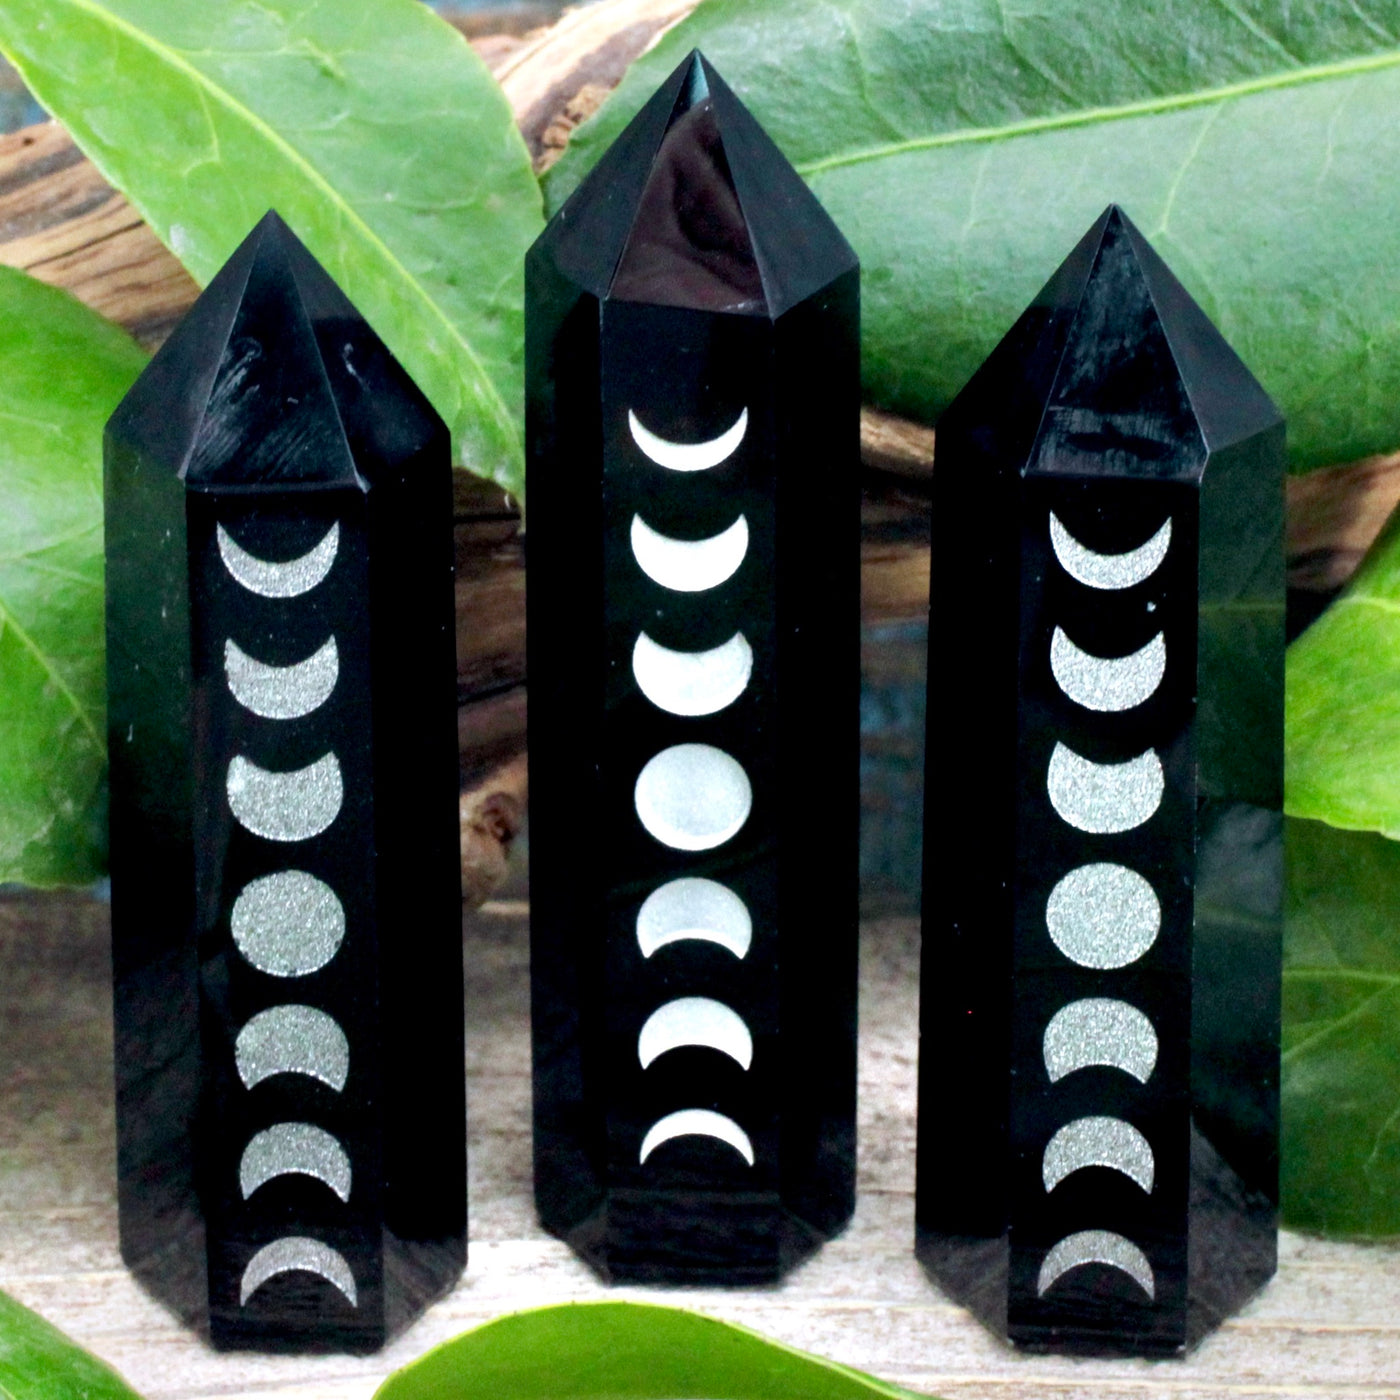 Obsidian Tower with Moon Phases